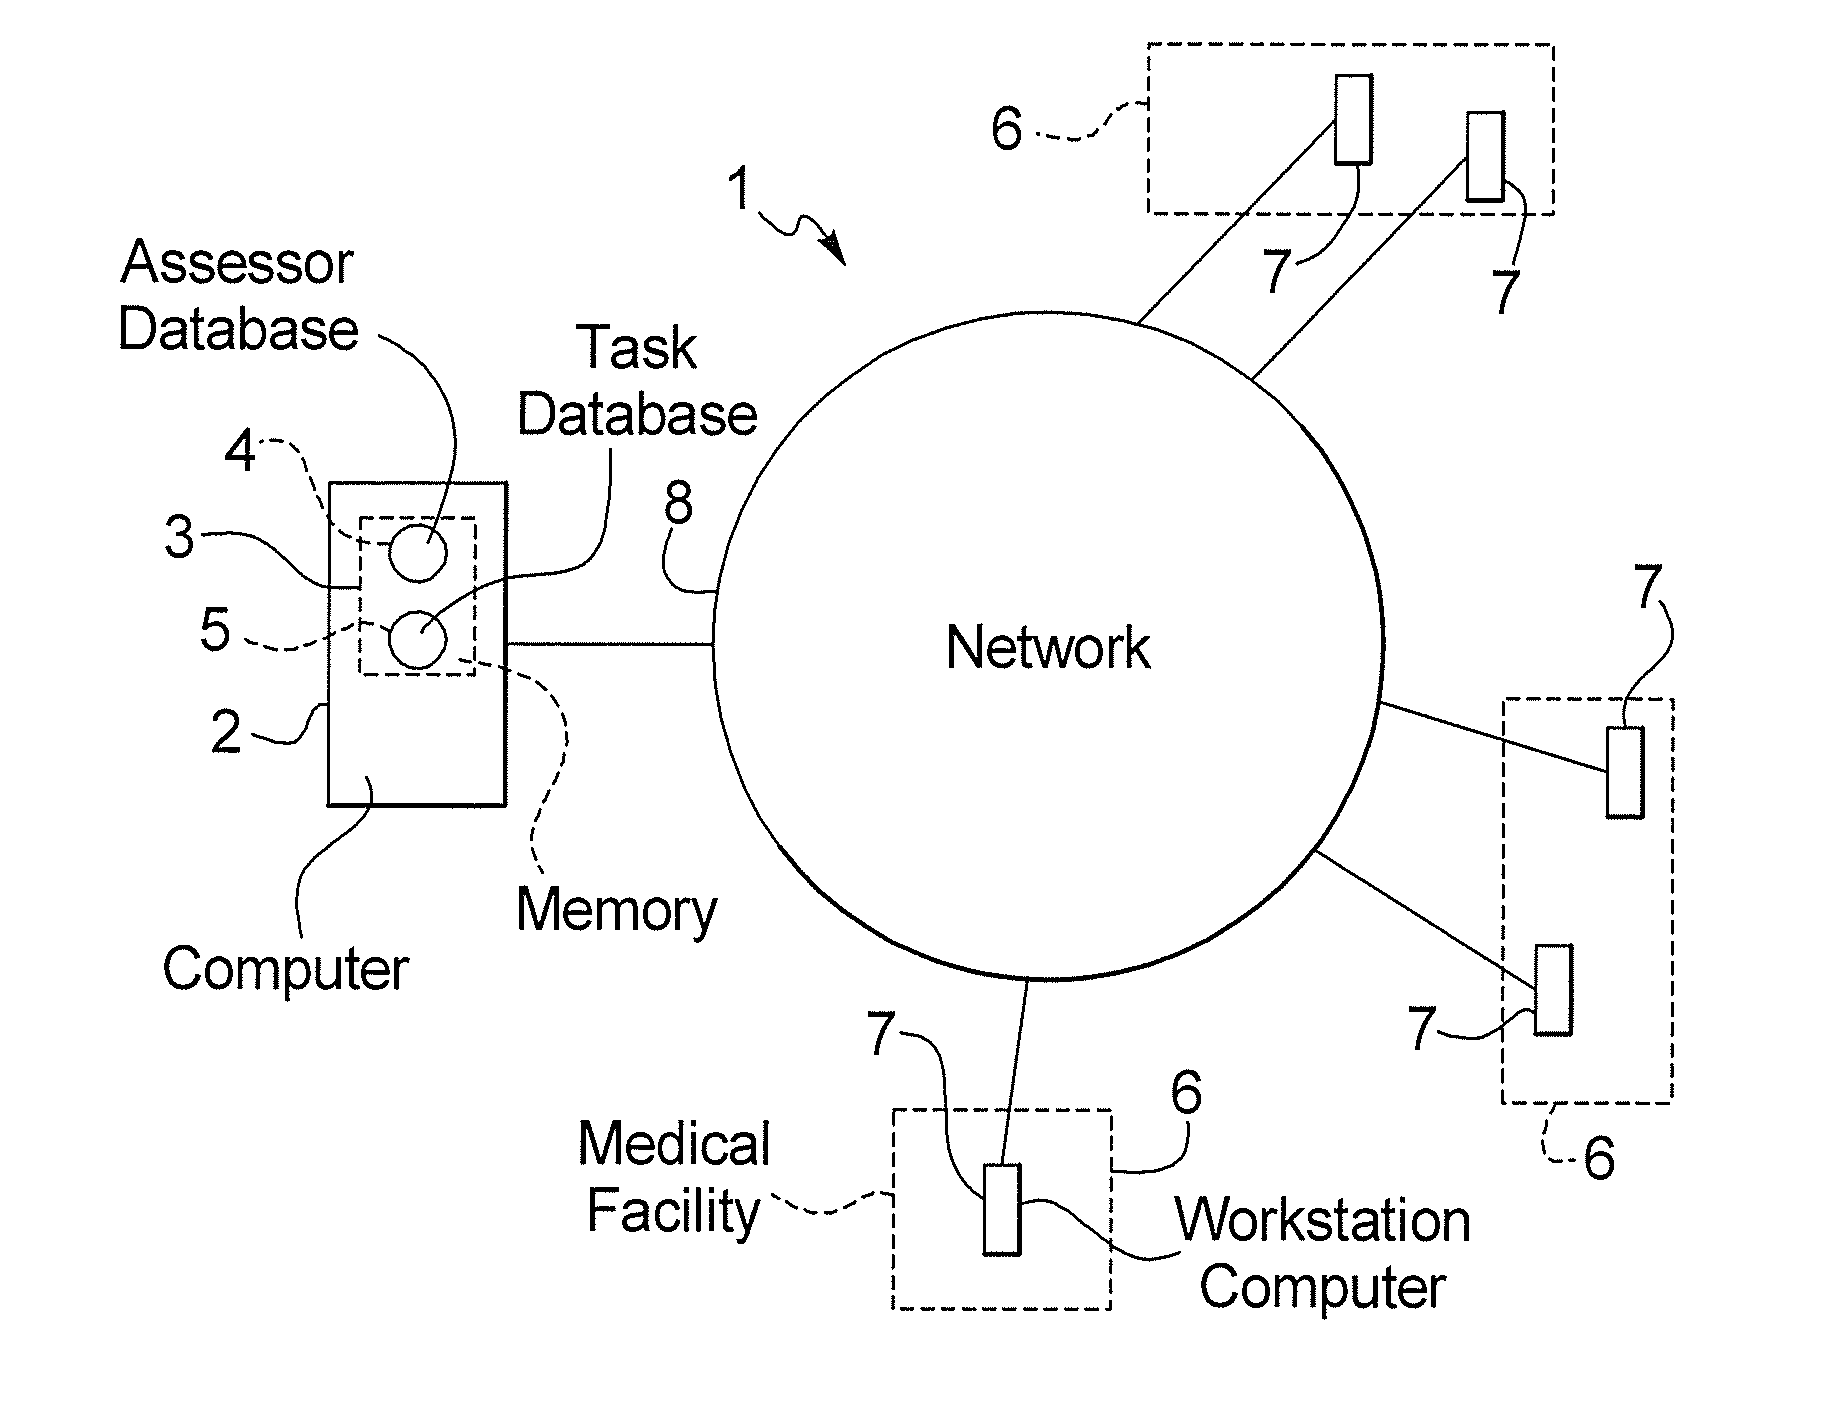 Method and system for automatically associating an assessor with a medical assessment task